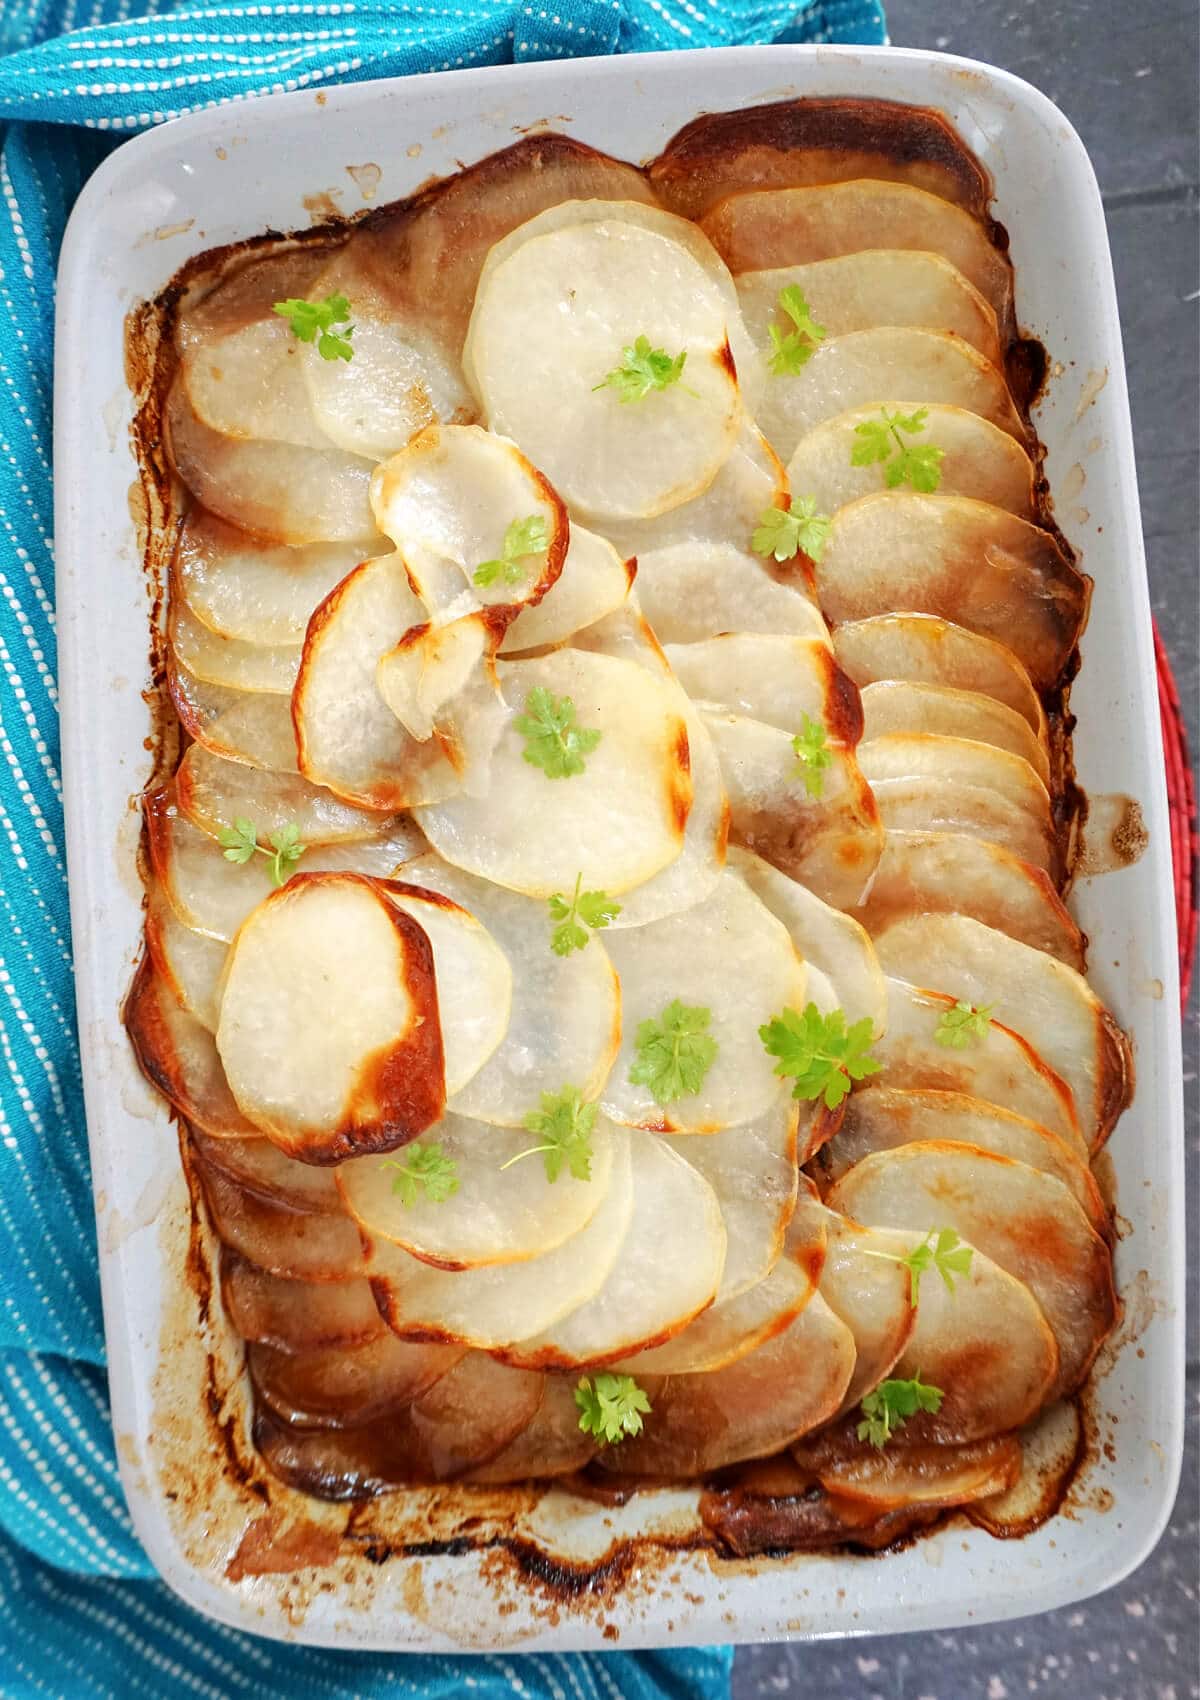 Overhead shot of a dish with  hotpot topped with sliced potatoes.